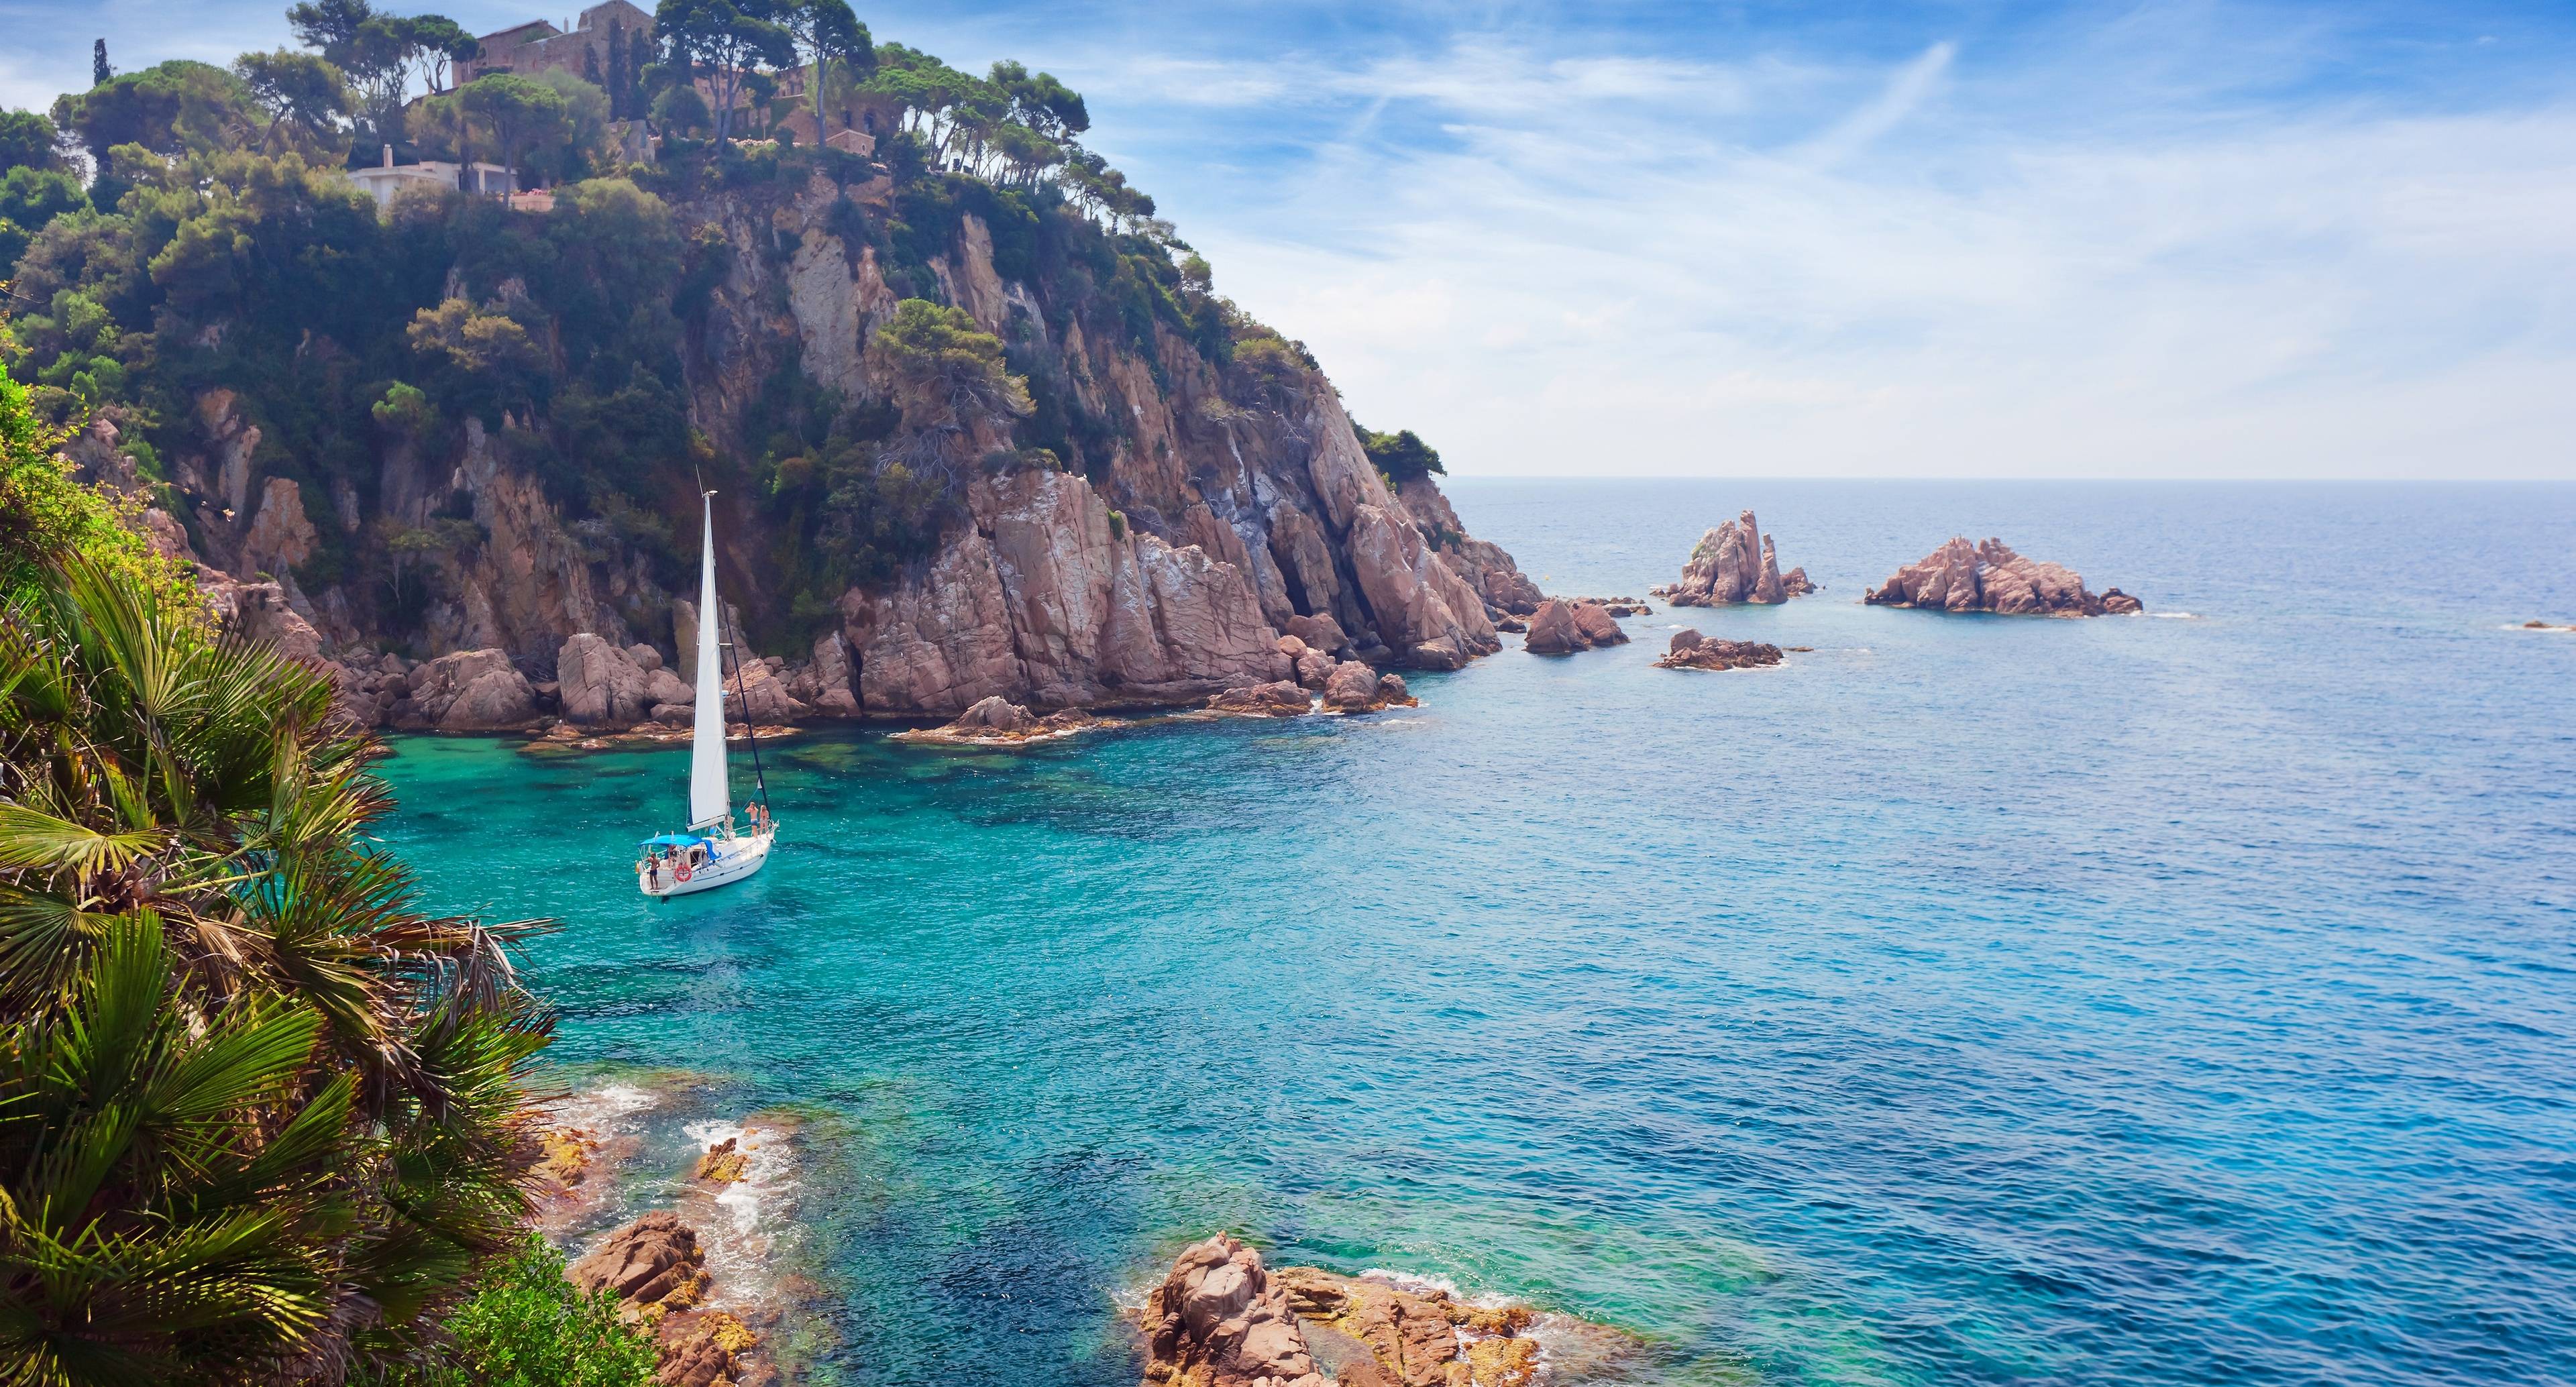 Visiting the Breathtaking Coves of the Costa Brava